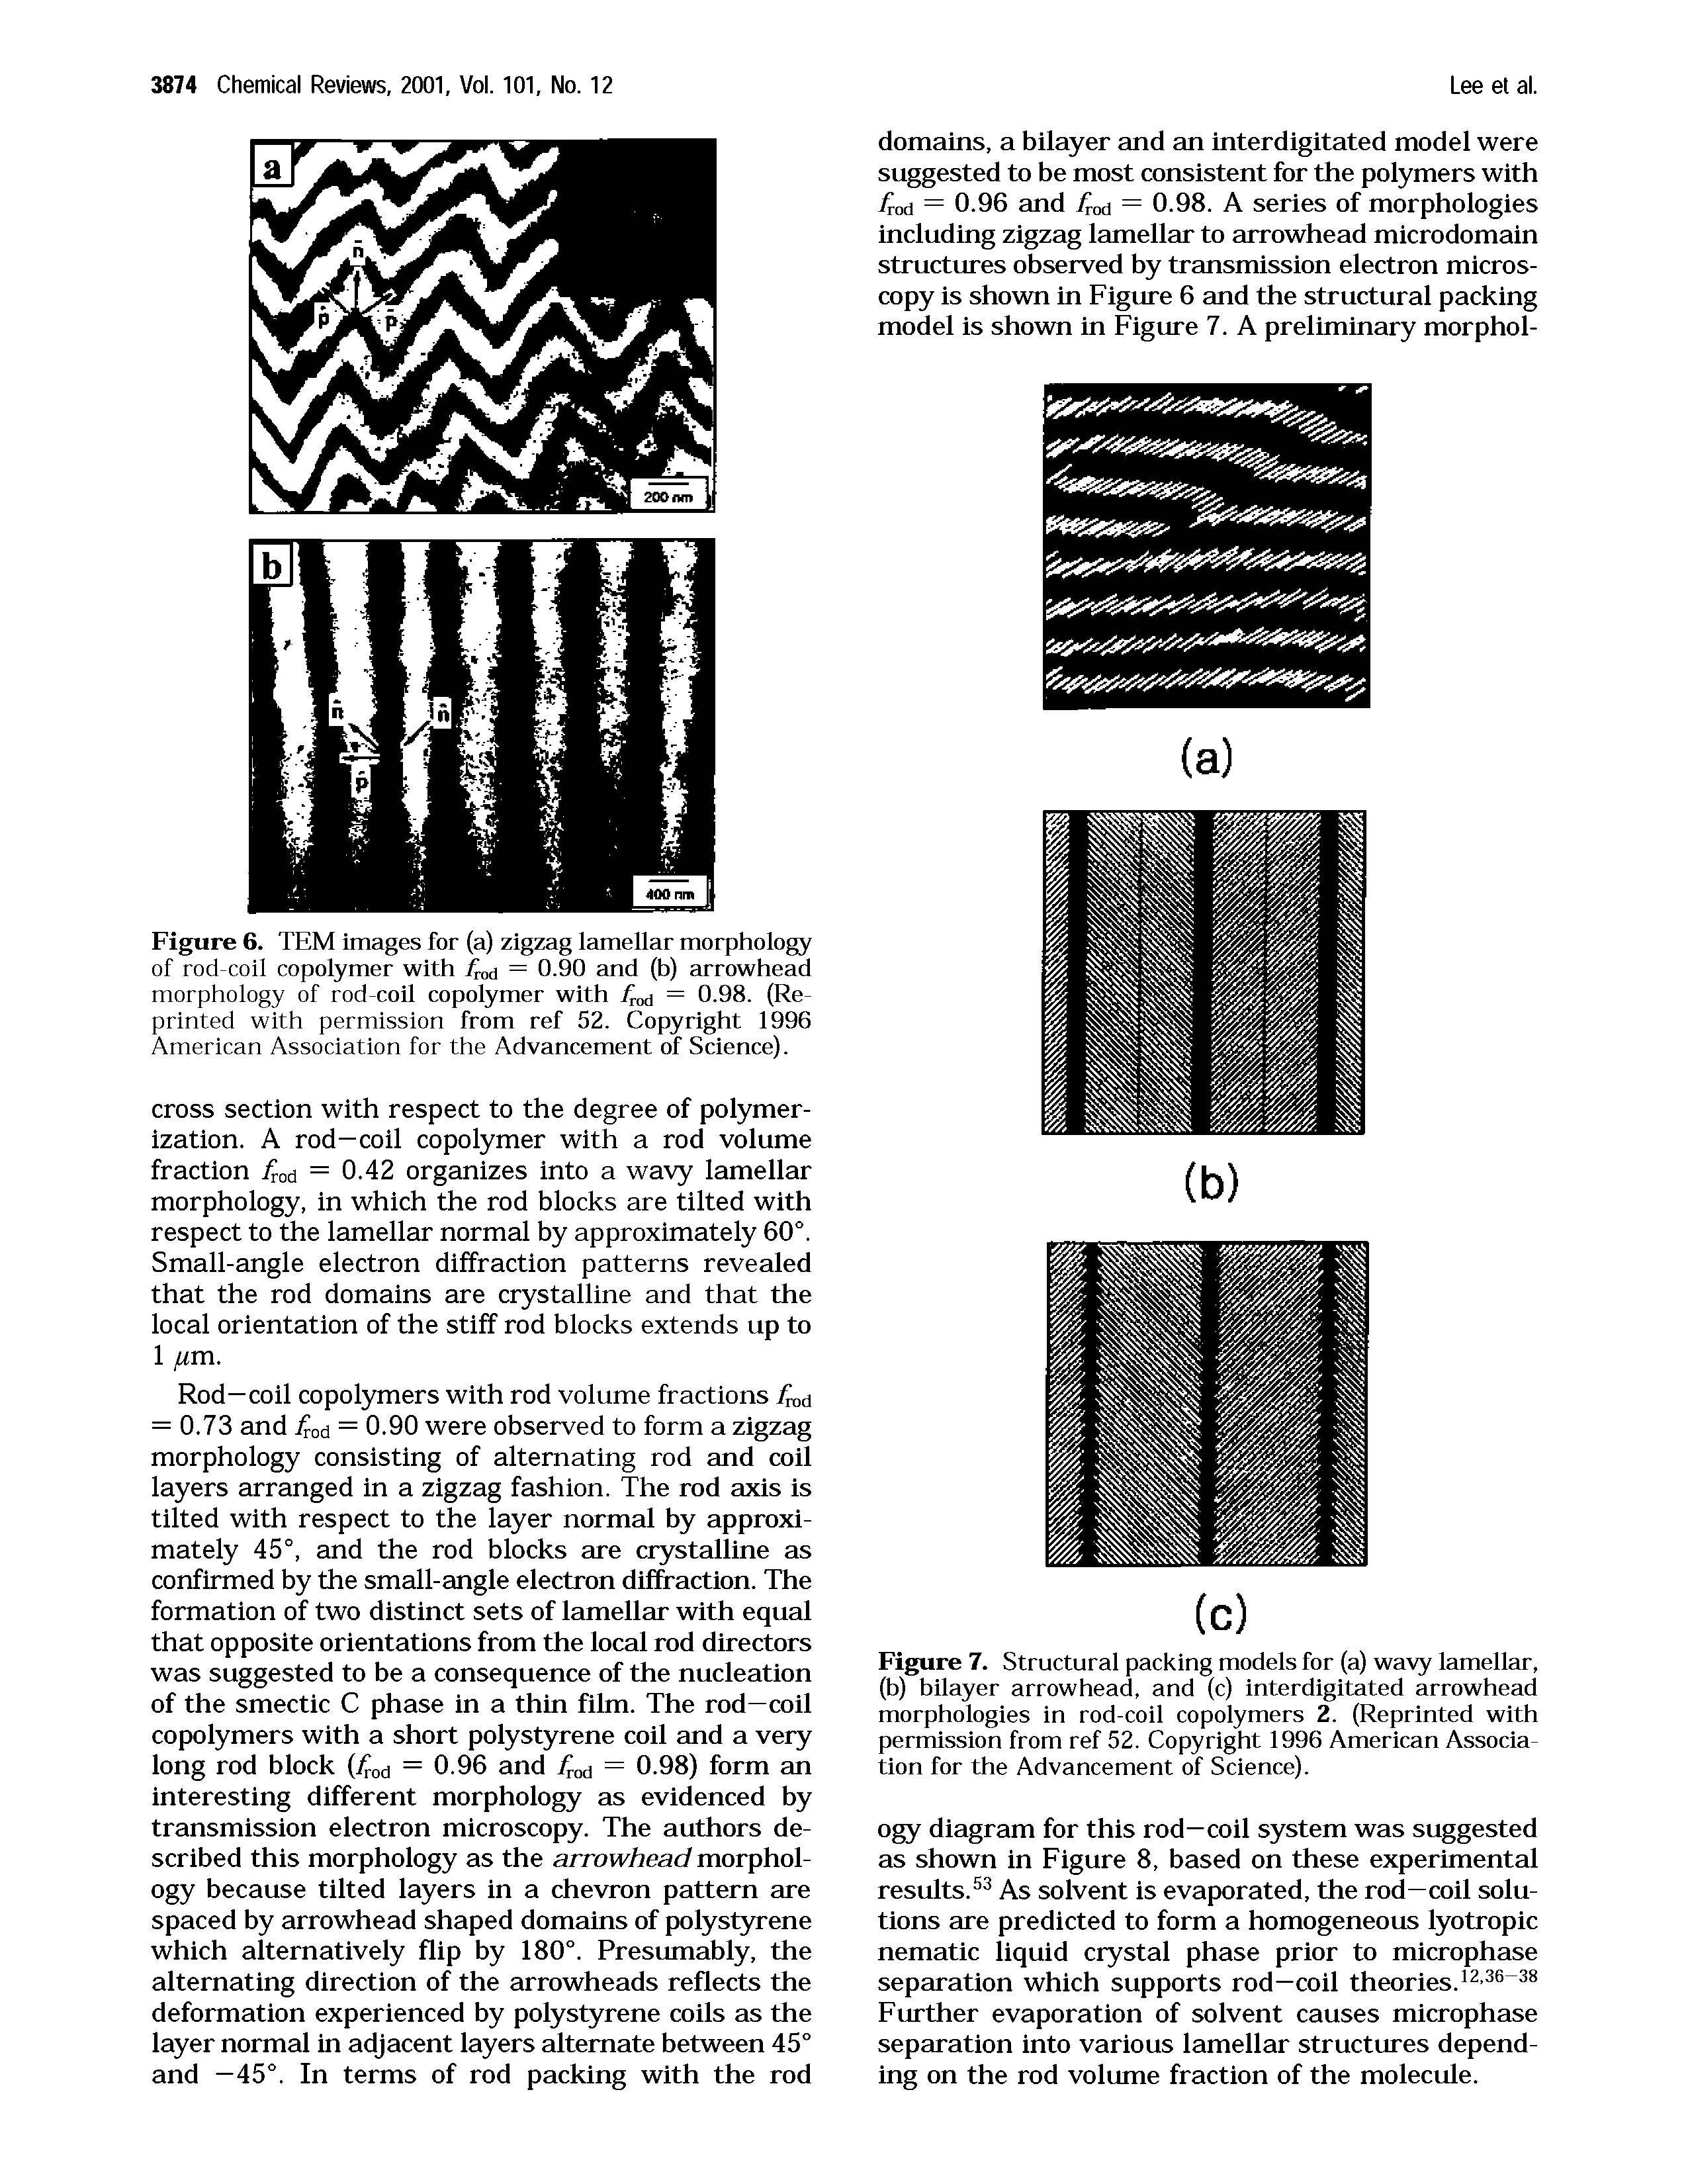 Figure 6. TEM images for (a) zigzag lamellar morphology of rod-coil copolymer with Toa = 0.90 and (b) arrowhead morphology of rod-coil copolymer with Tod = 0.98. (Reprinted with permission from ref 52. Copyright 1996 American Association for the Advancement of Science).